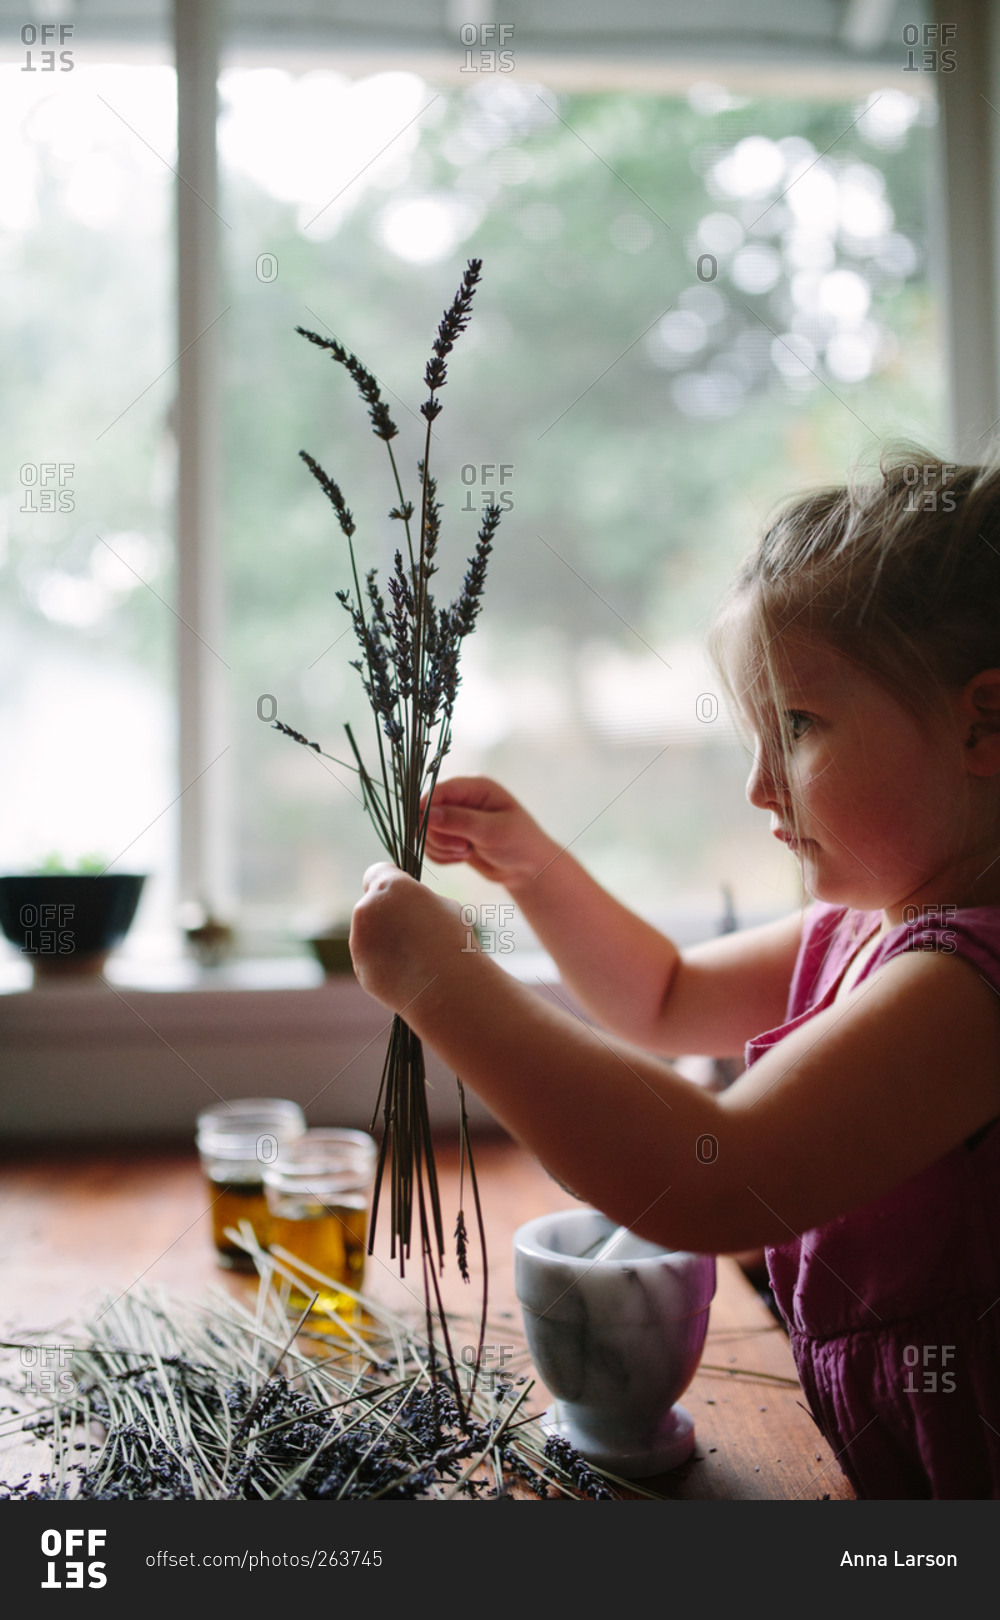 Young girl gathering stems of dried lavender to make scented oil at kitchen table